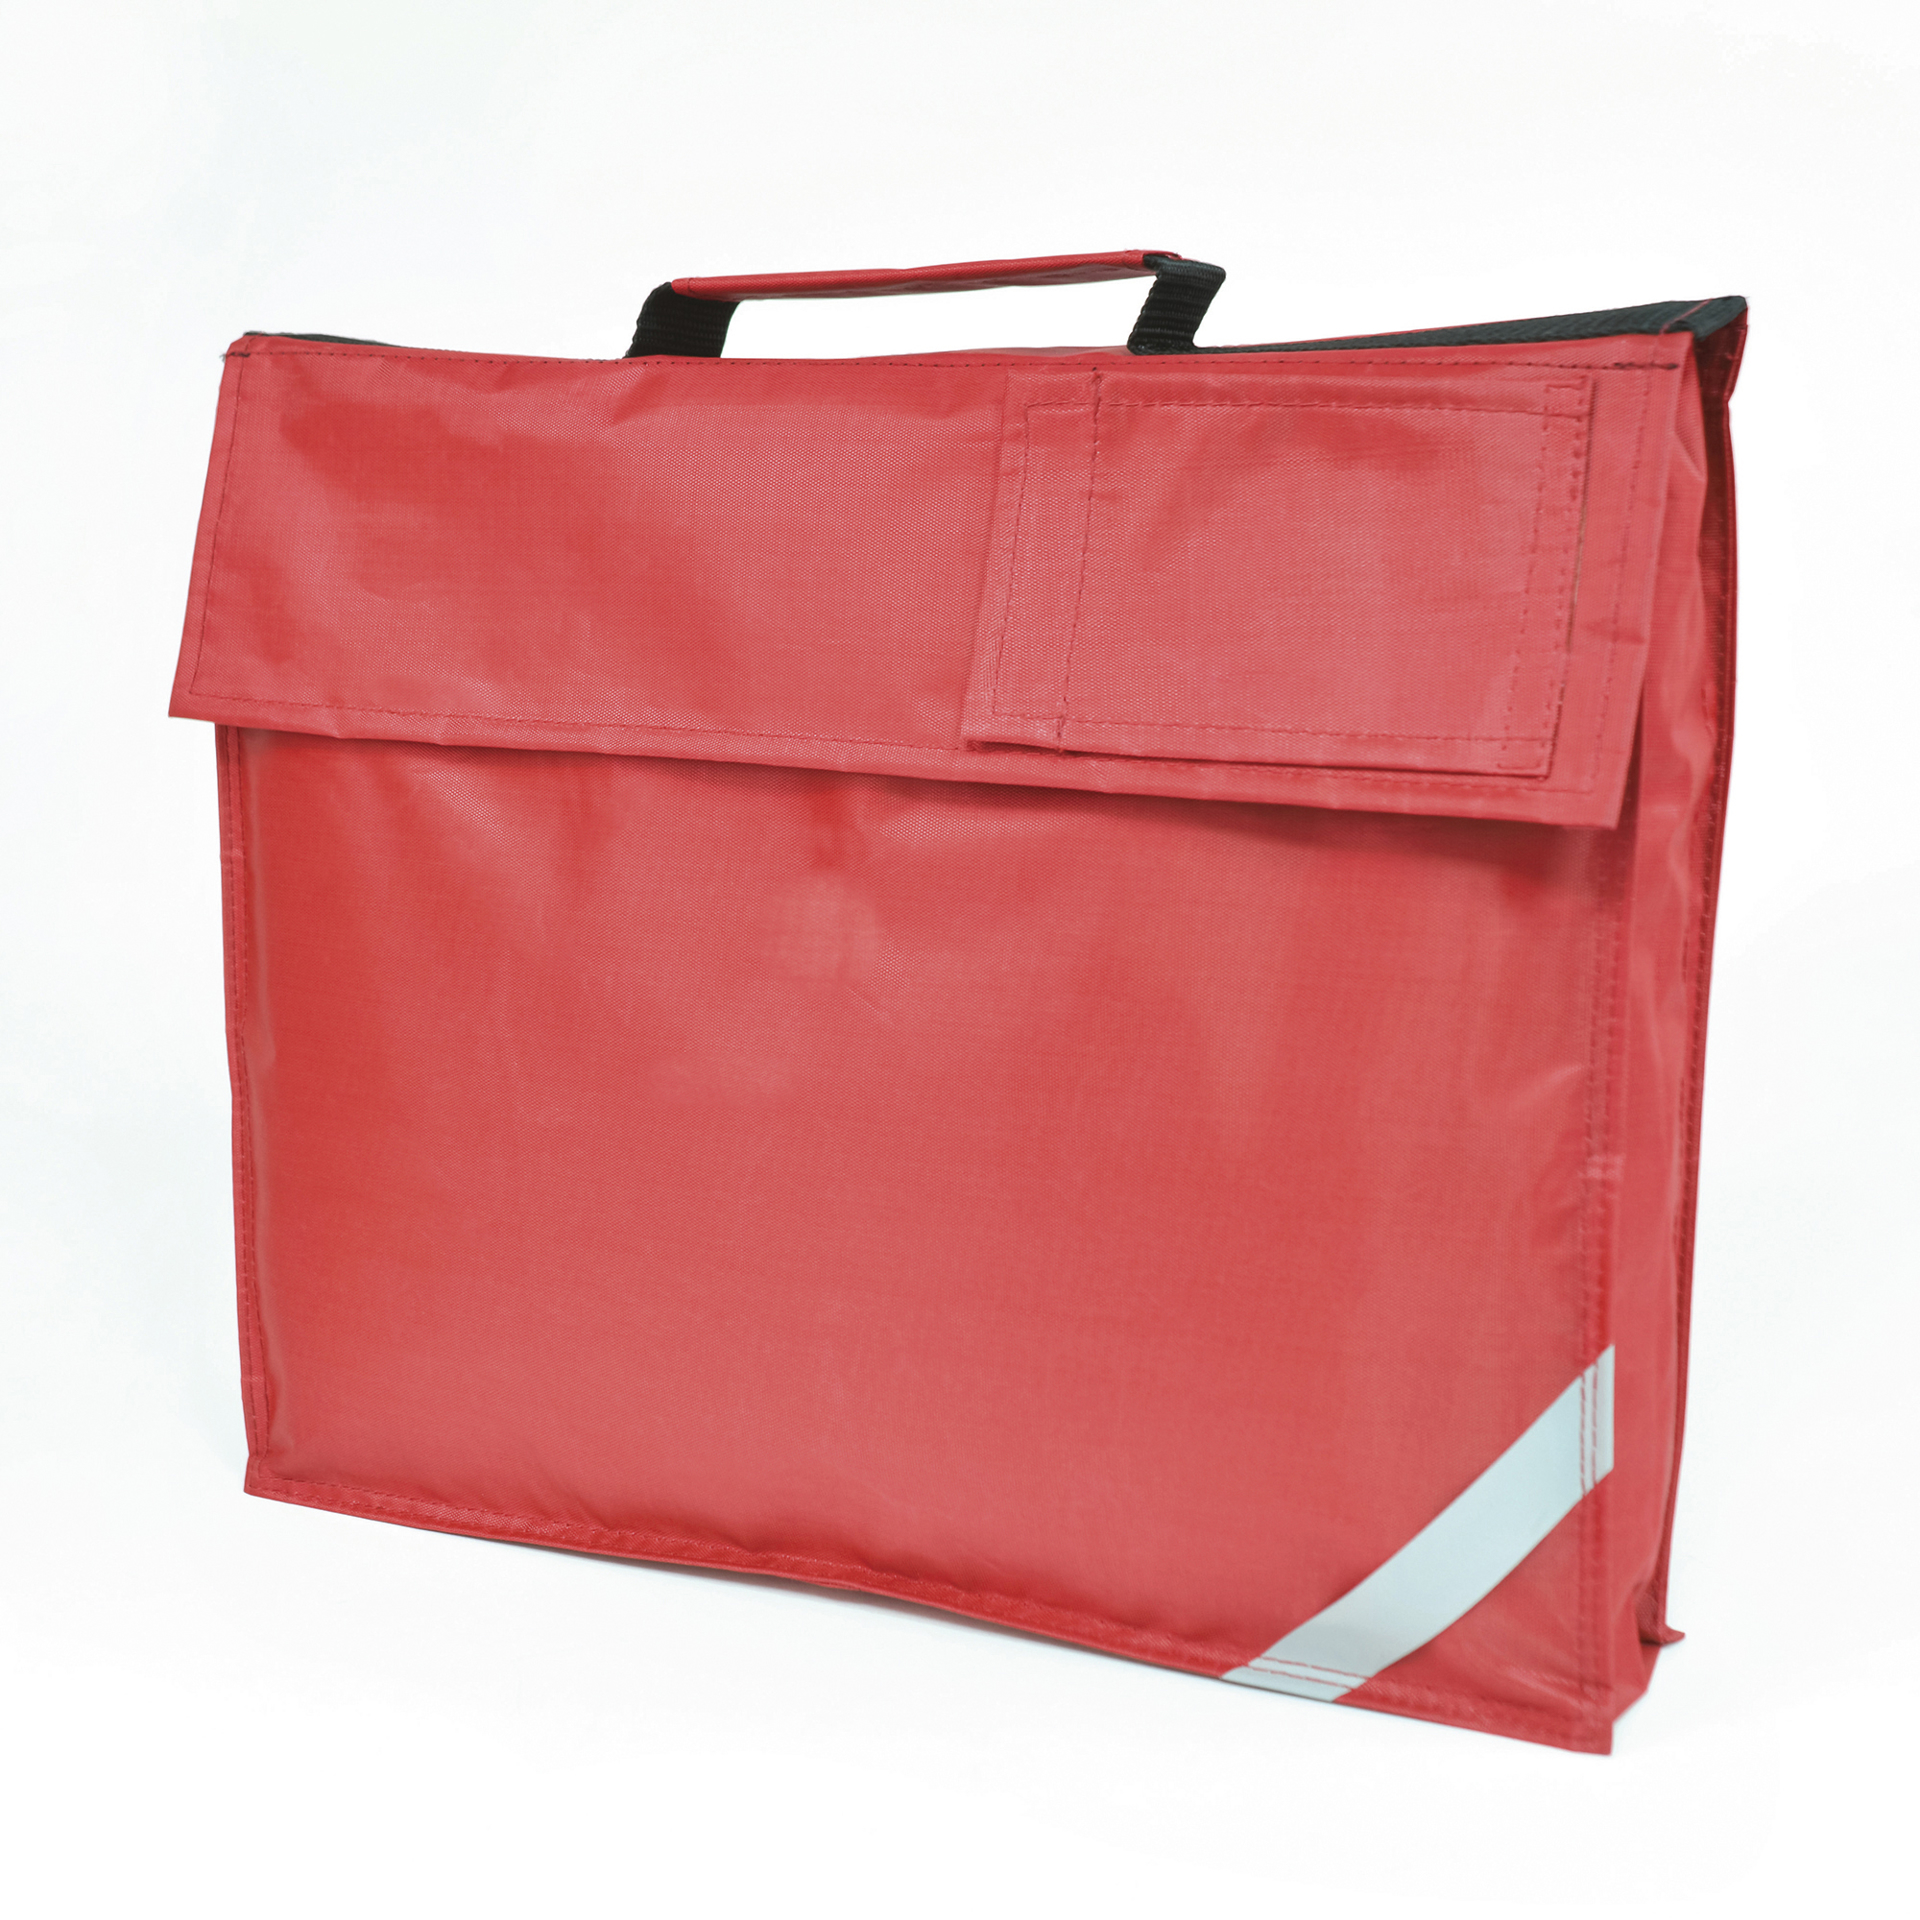 Red jasmine bag without print